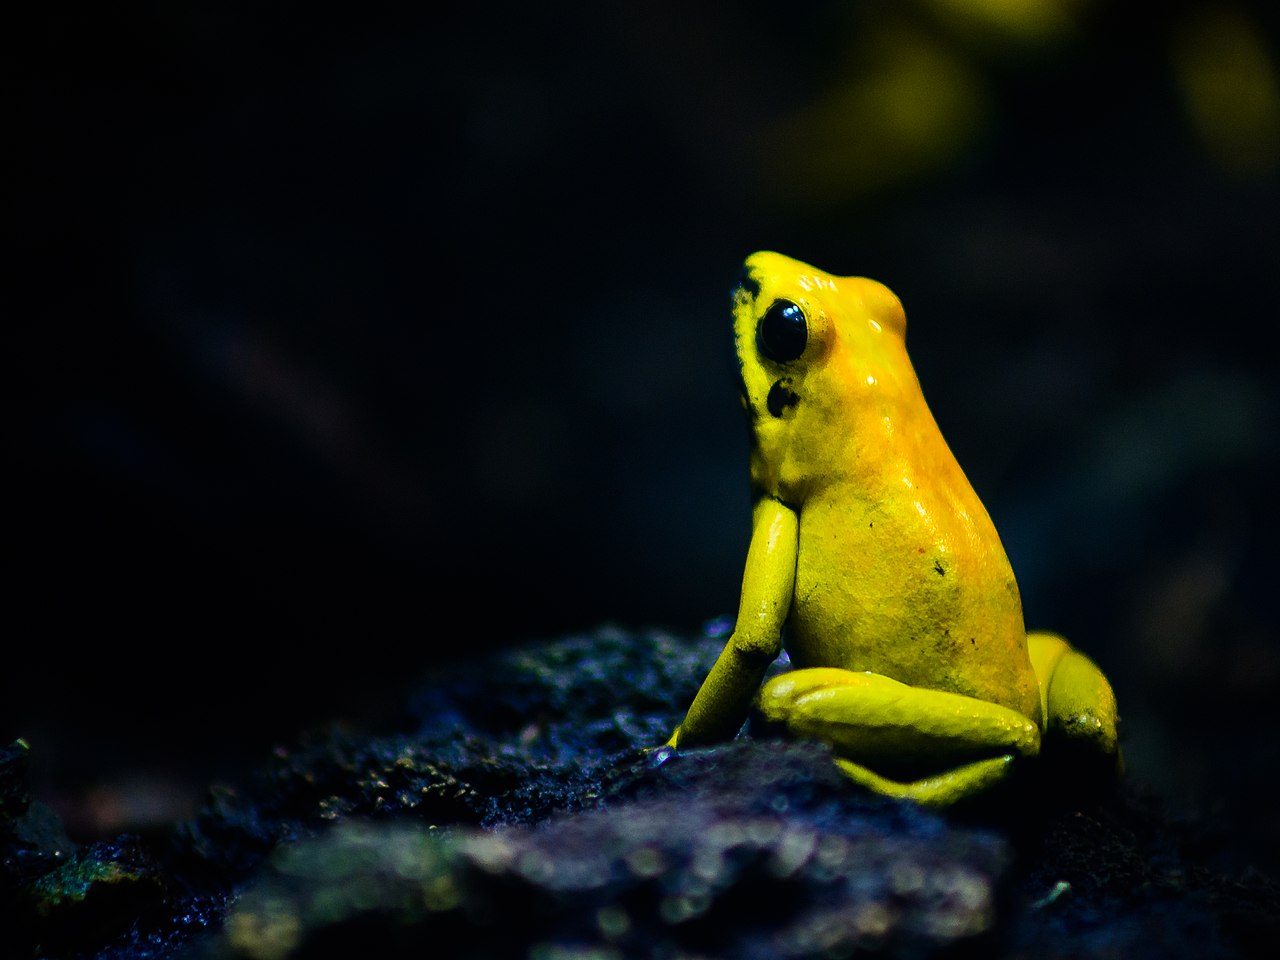 Indigenous community saves Colombia’s poison dart frog from coca and logging